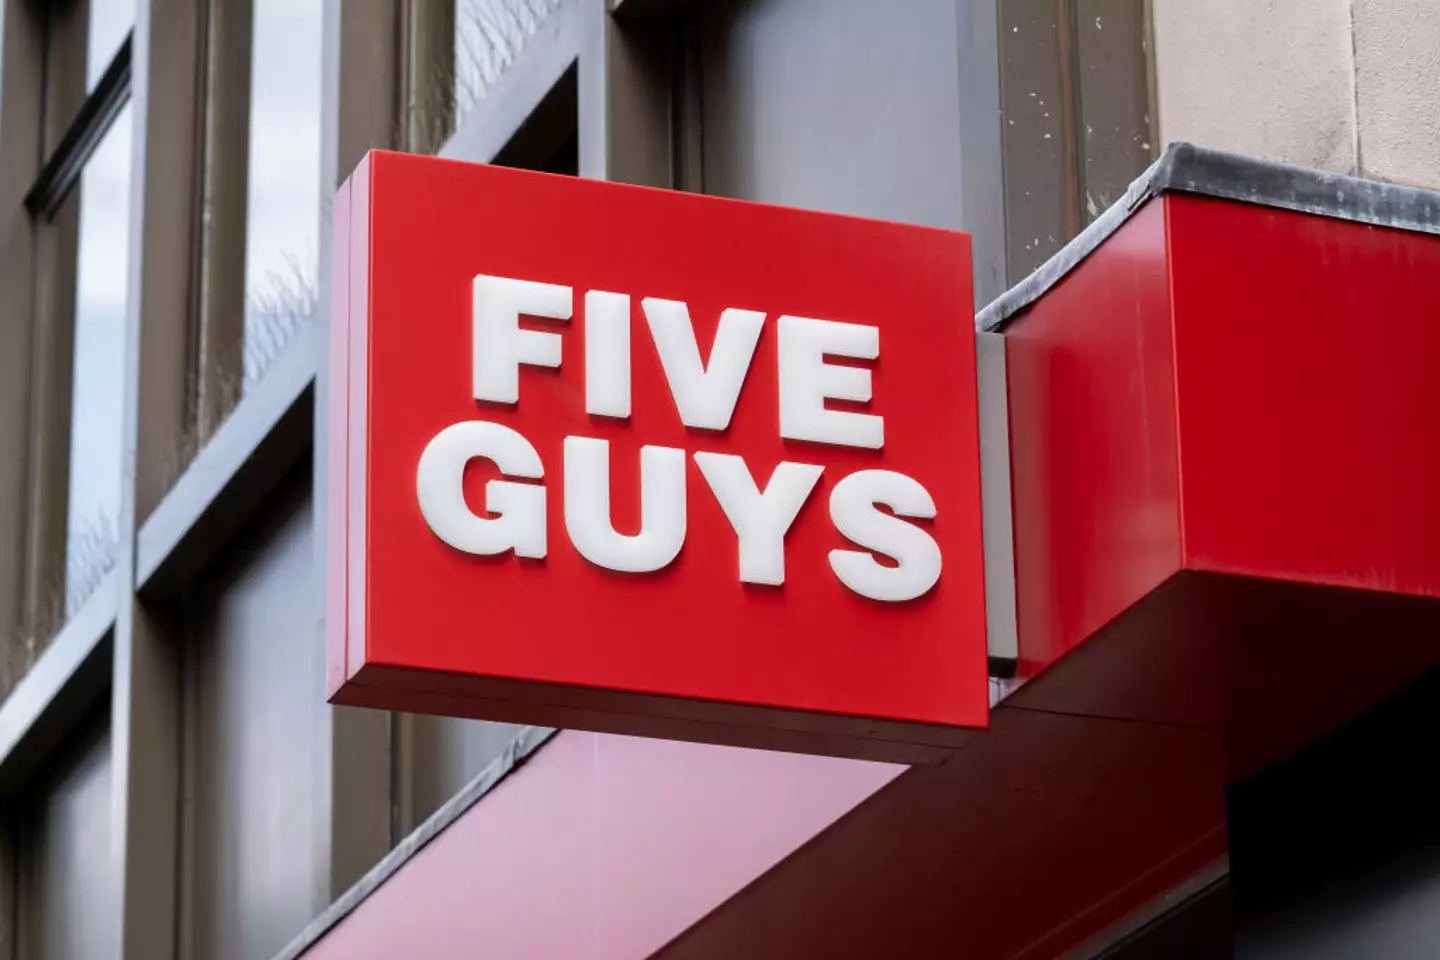 The CEO of Five Guys has commented on its prices in the past.